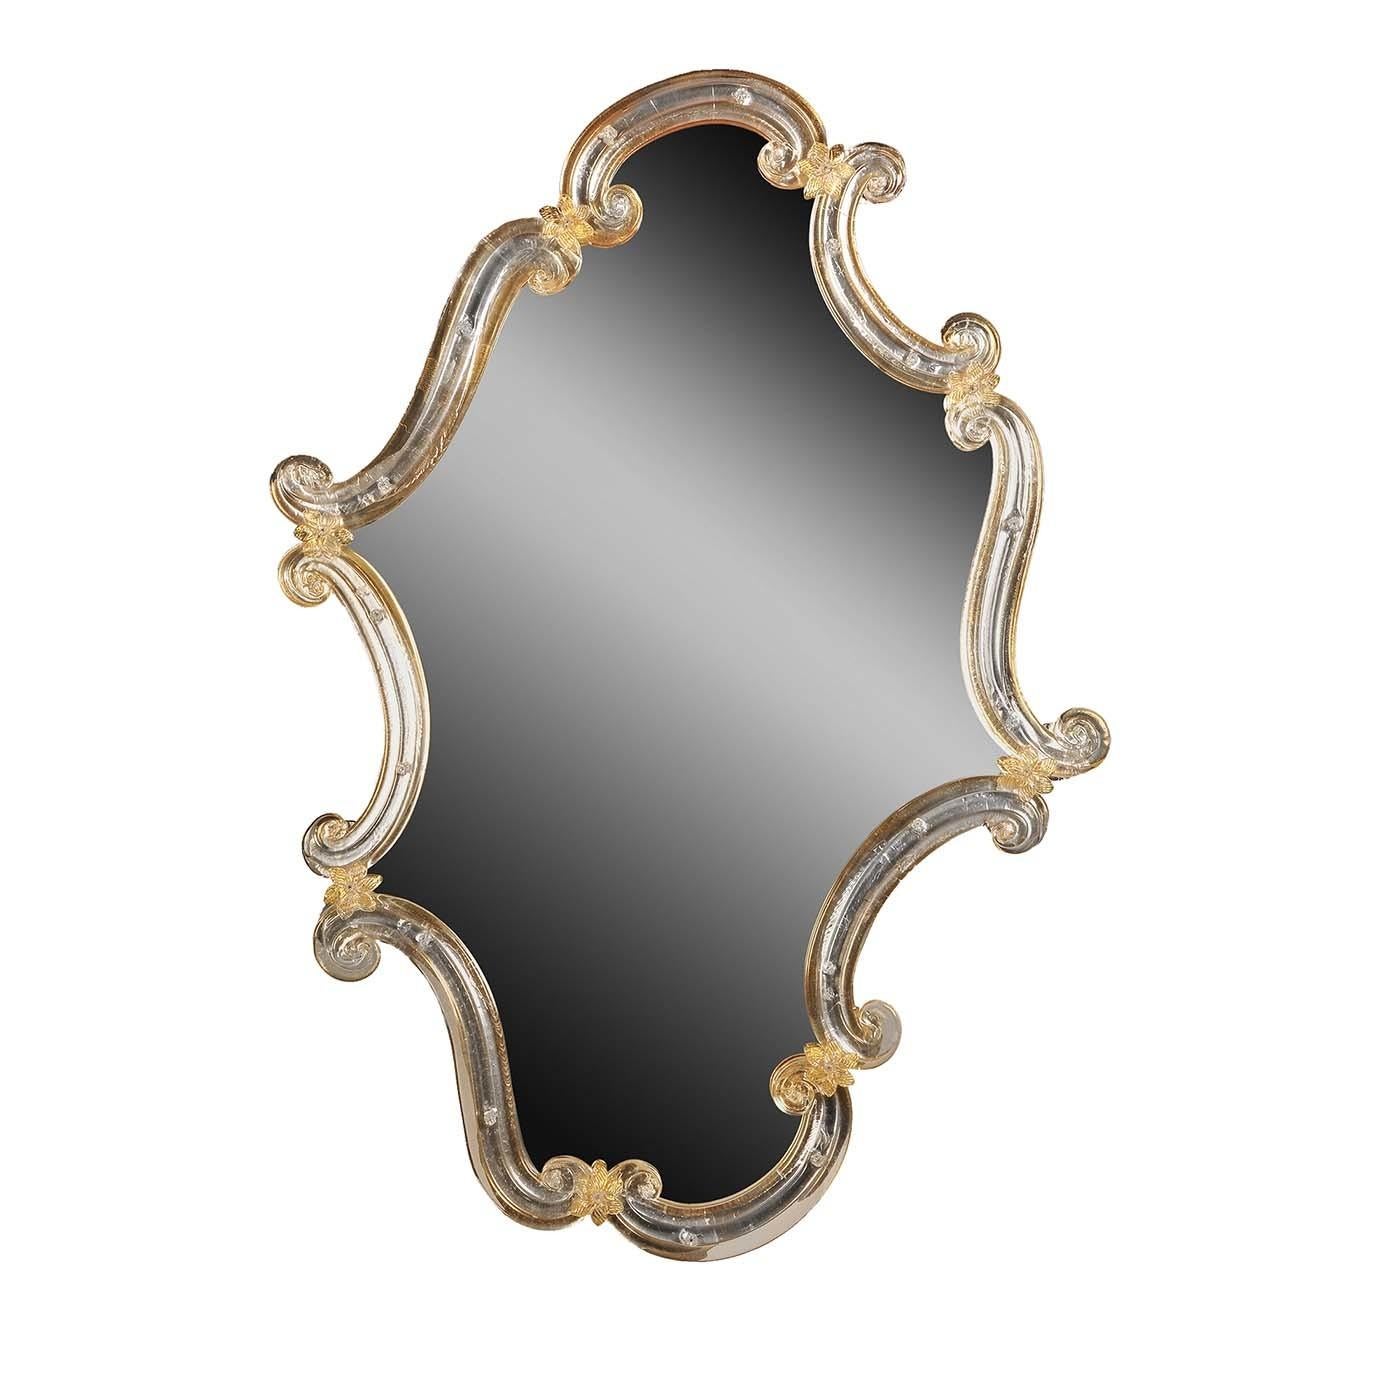 This superb mirror is part of the Storti collection, from the Italian word for bent, hinting at the sinuous frame that graces its asymmetric silhouette. The frame, crafted of mouth-blown Murano glass, features a striking texture and a silver finish